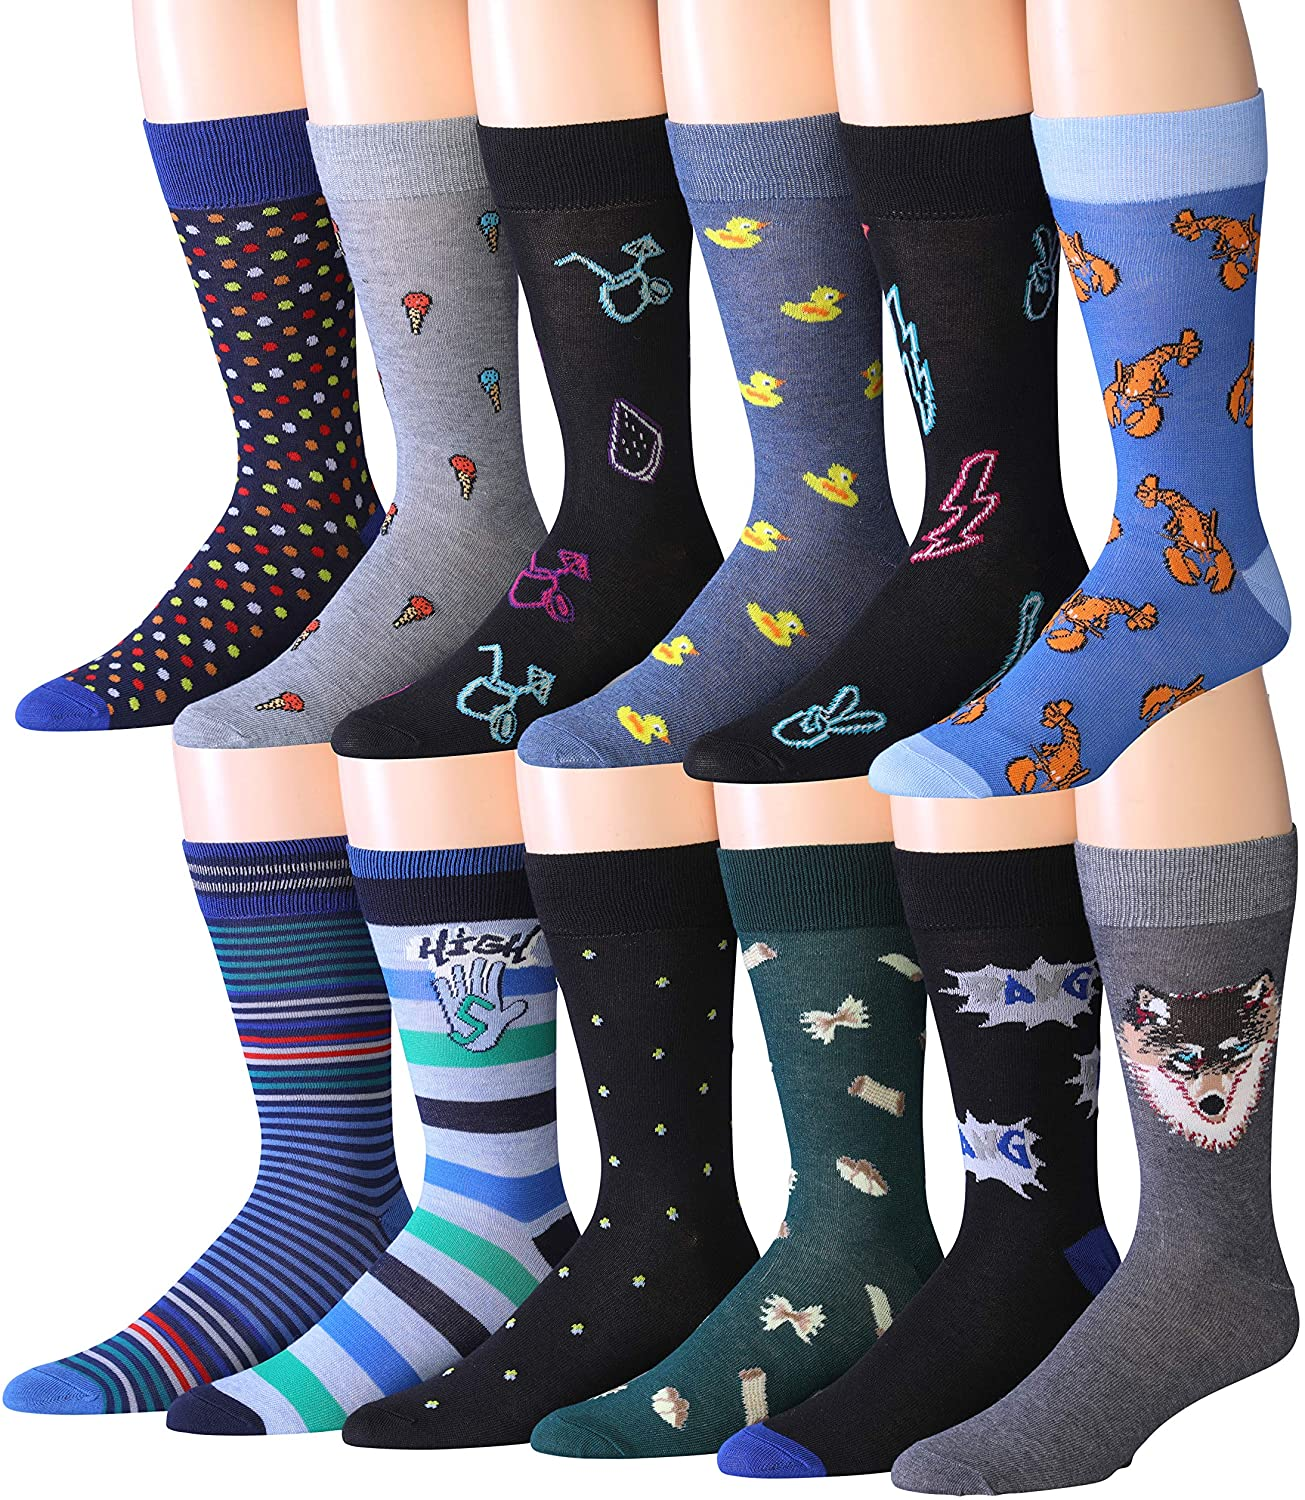 Mens 12-Pairs Funny Funky Crazy Novelty Colorful Patterned Dress Socks